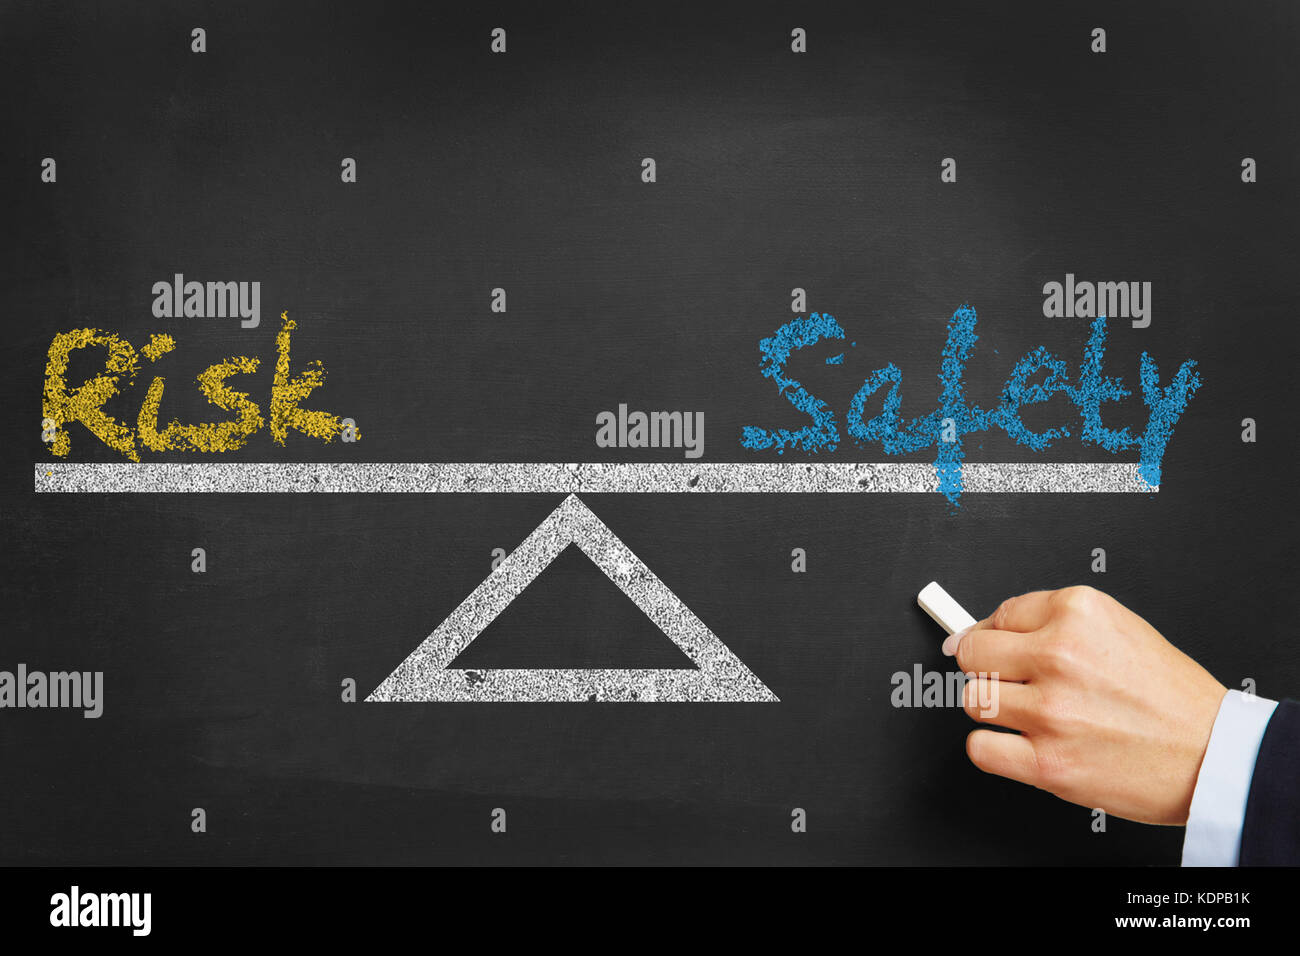 risk and security safety equilibrium concept on blackboard Stock Photo